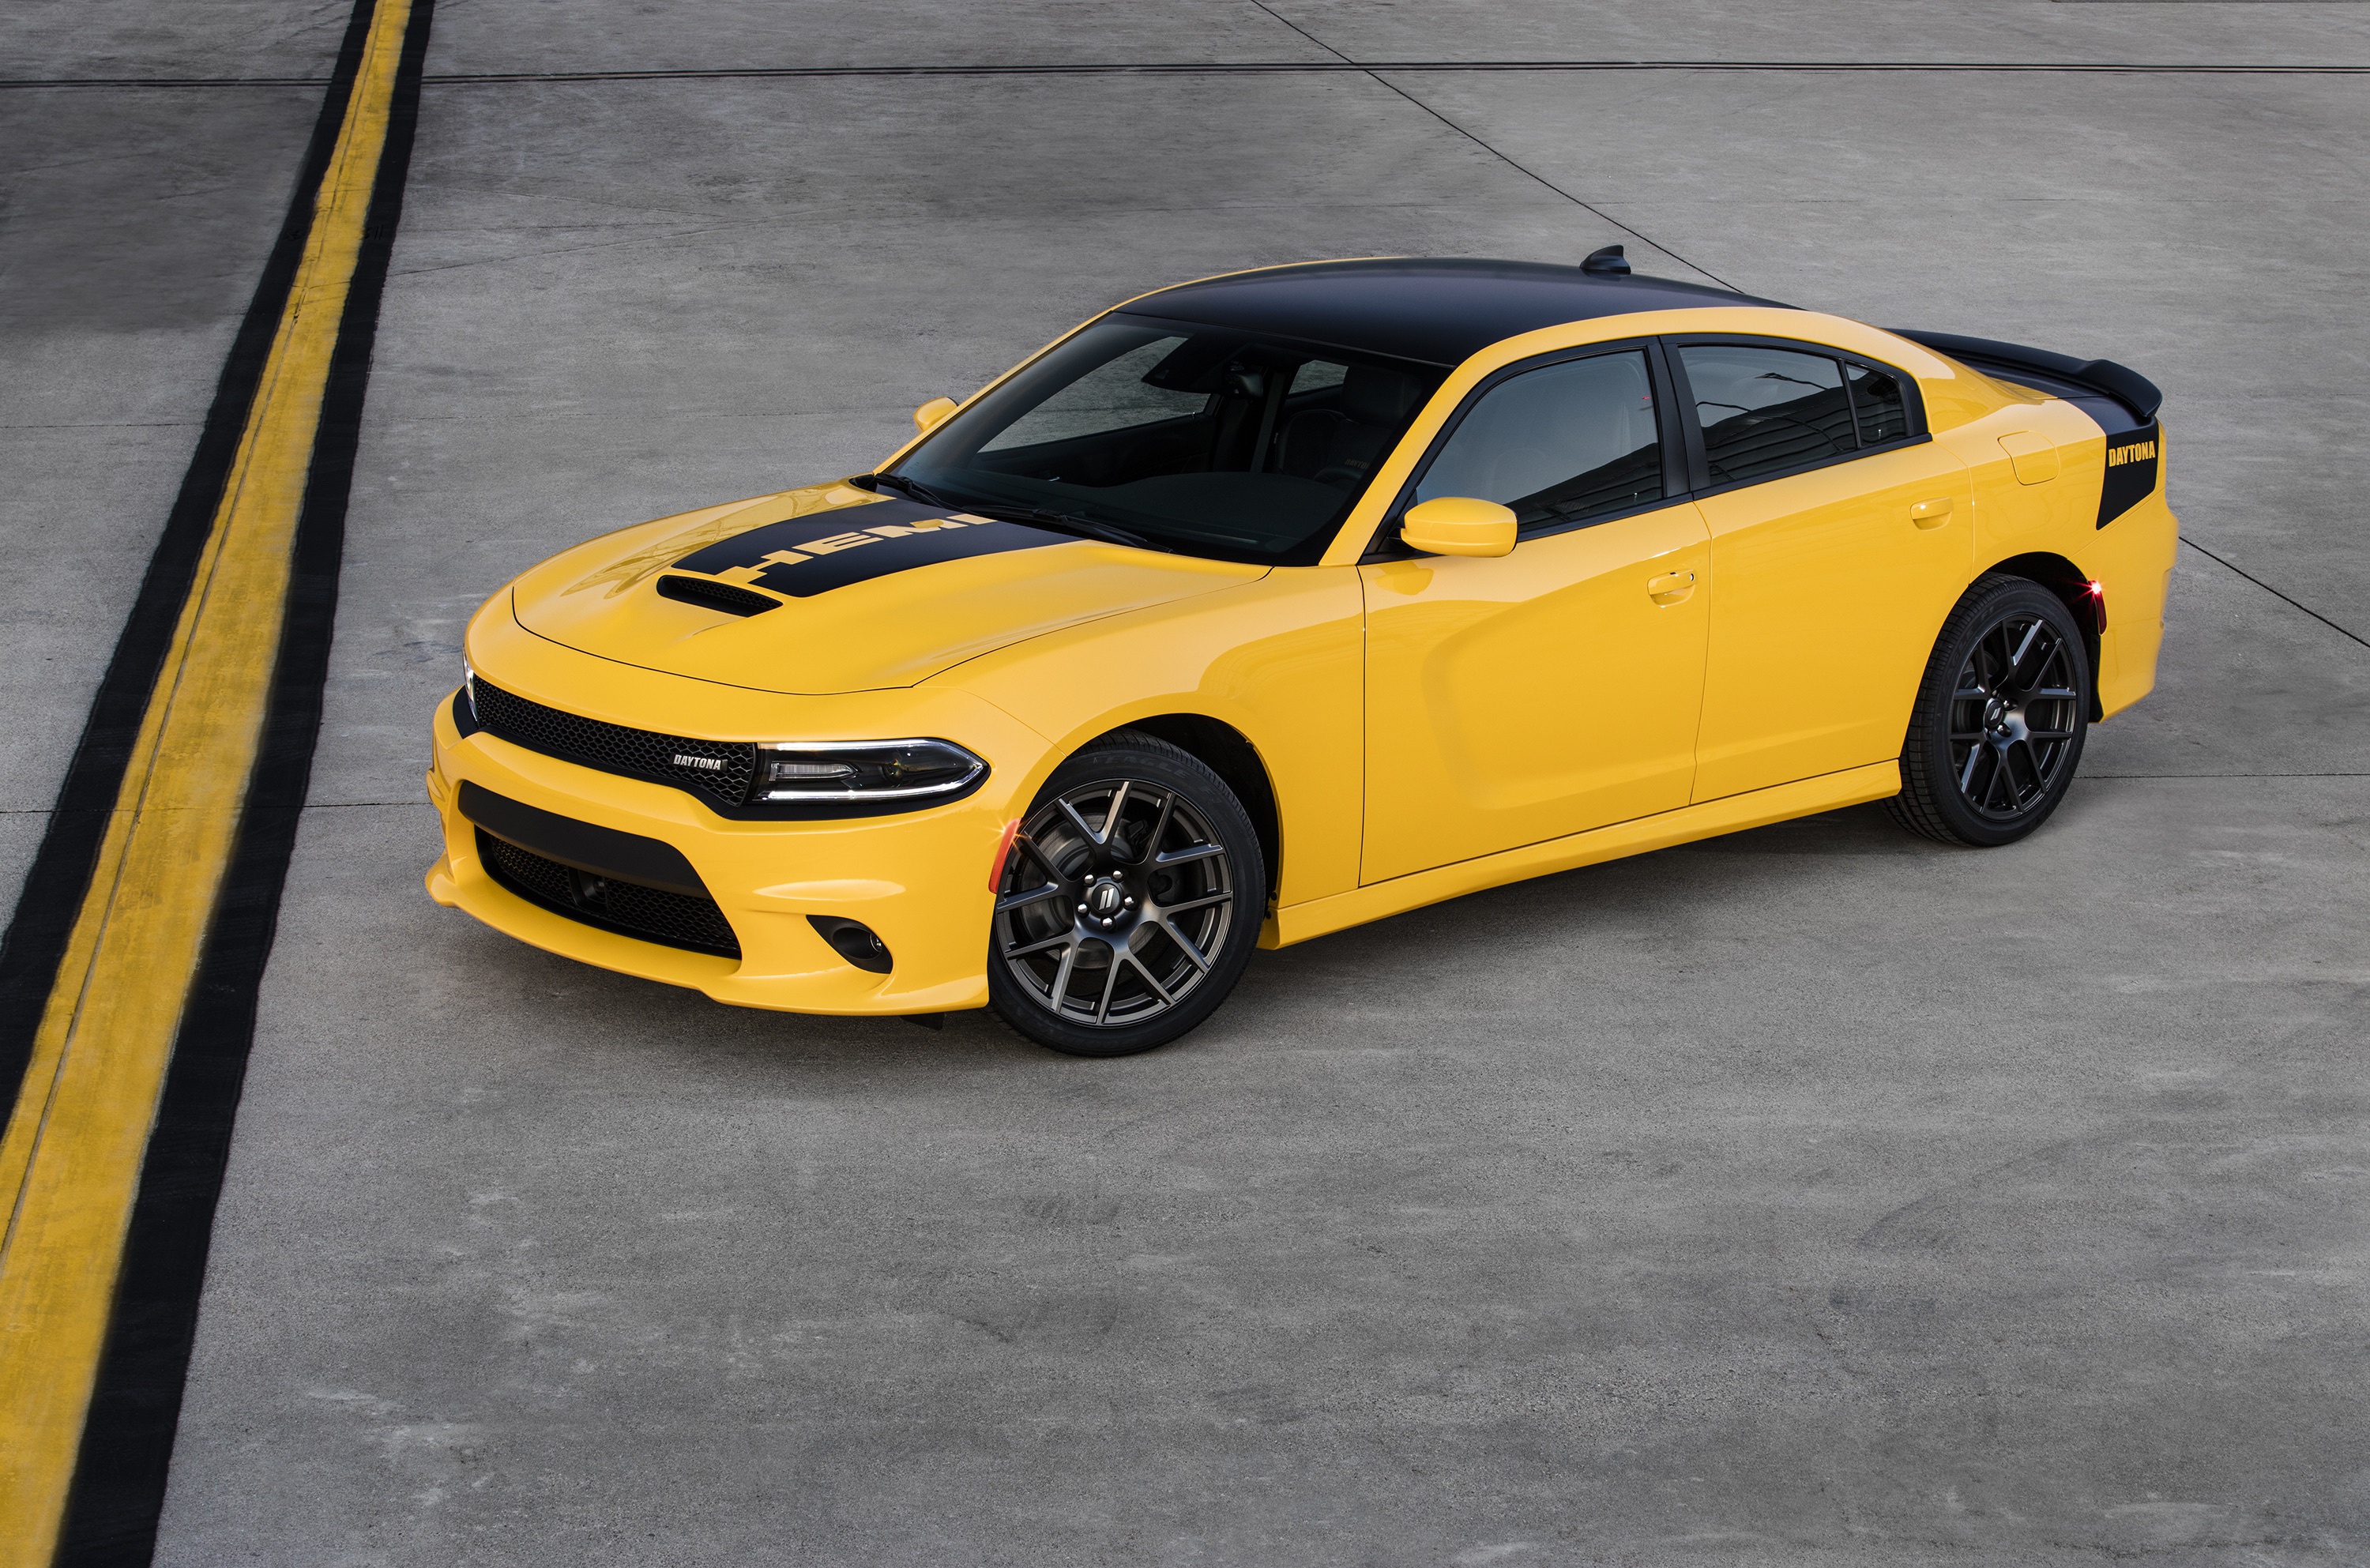 Car Dodge Dodge Charger Muscle Car Vehicle Yellow Car 3000x1985